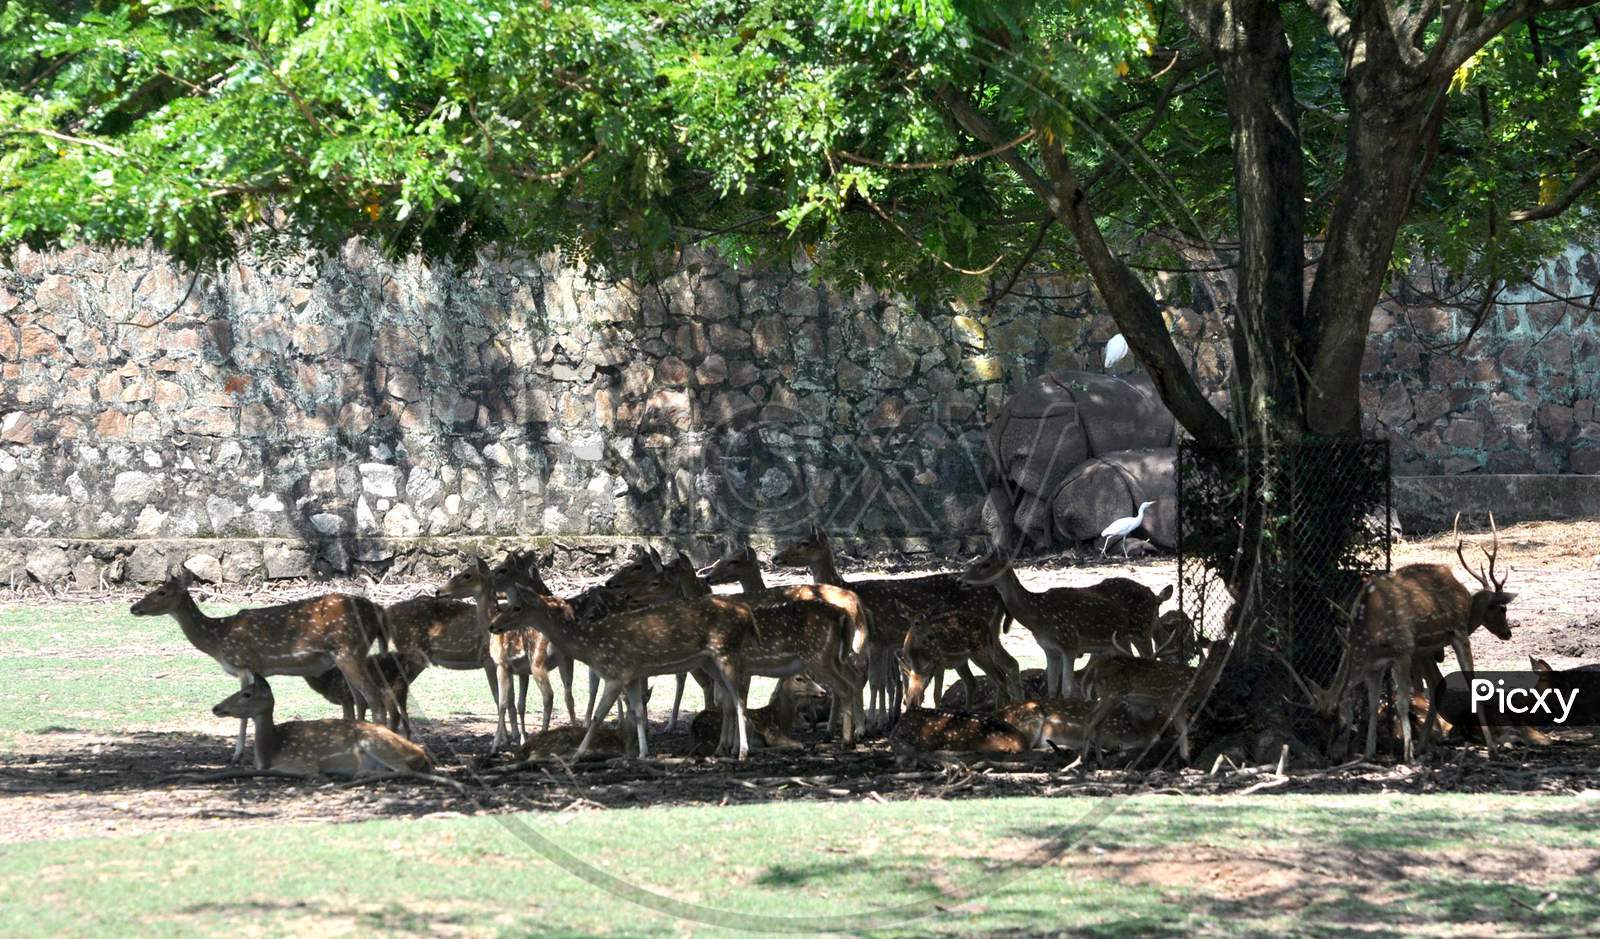 Deer take shelter under a tree to escape from scorching heat at Assam state zoo cum botanical garden in Guwahati Sep 3, 2020.